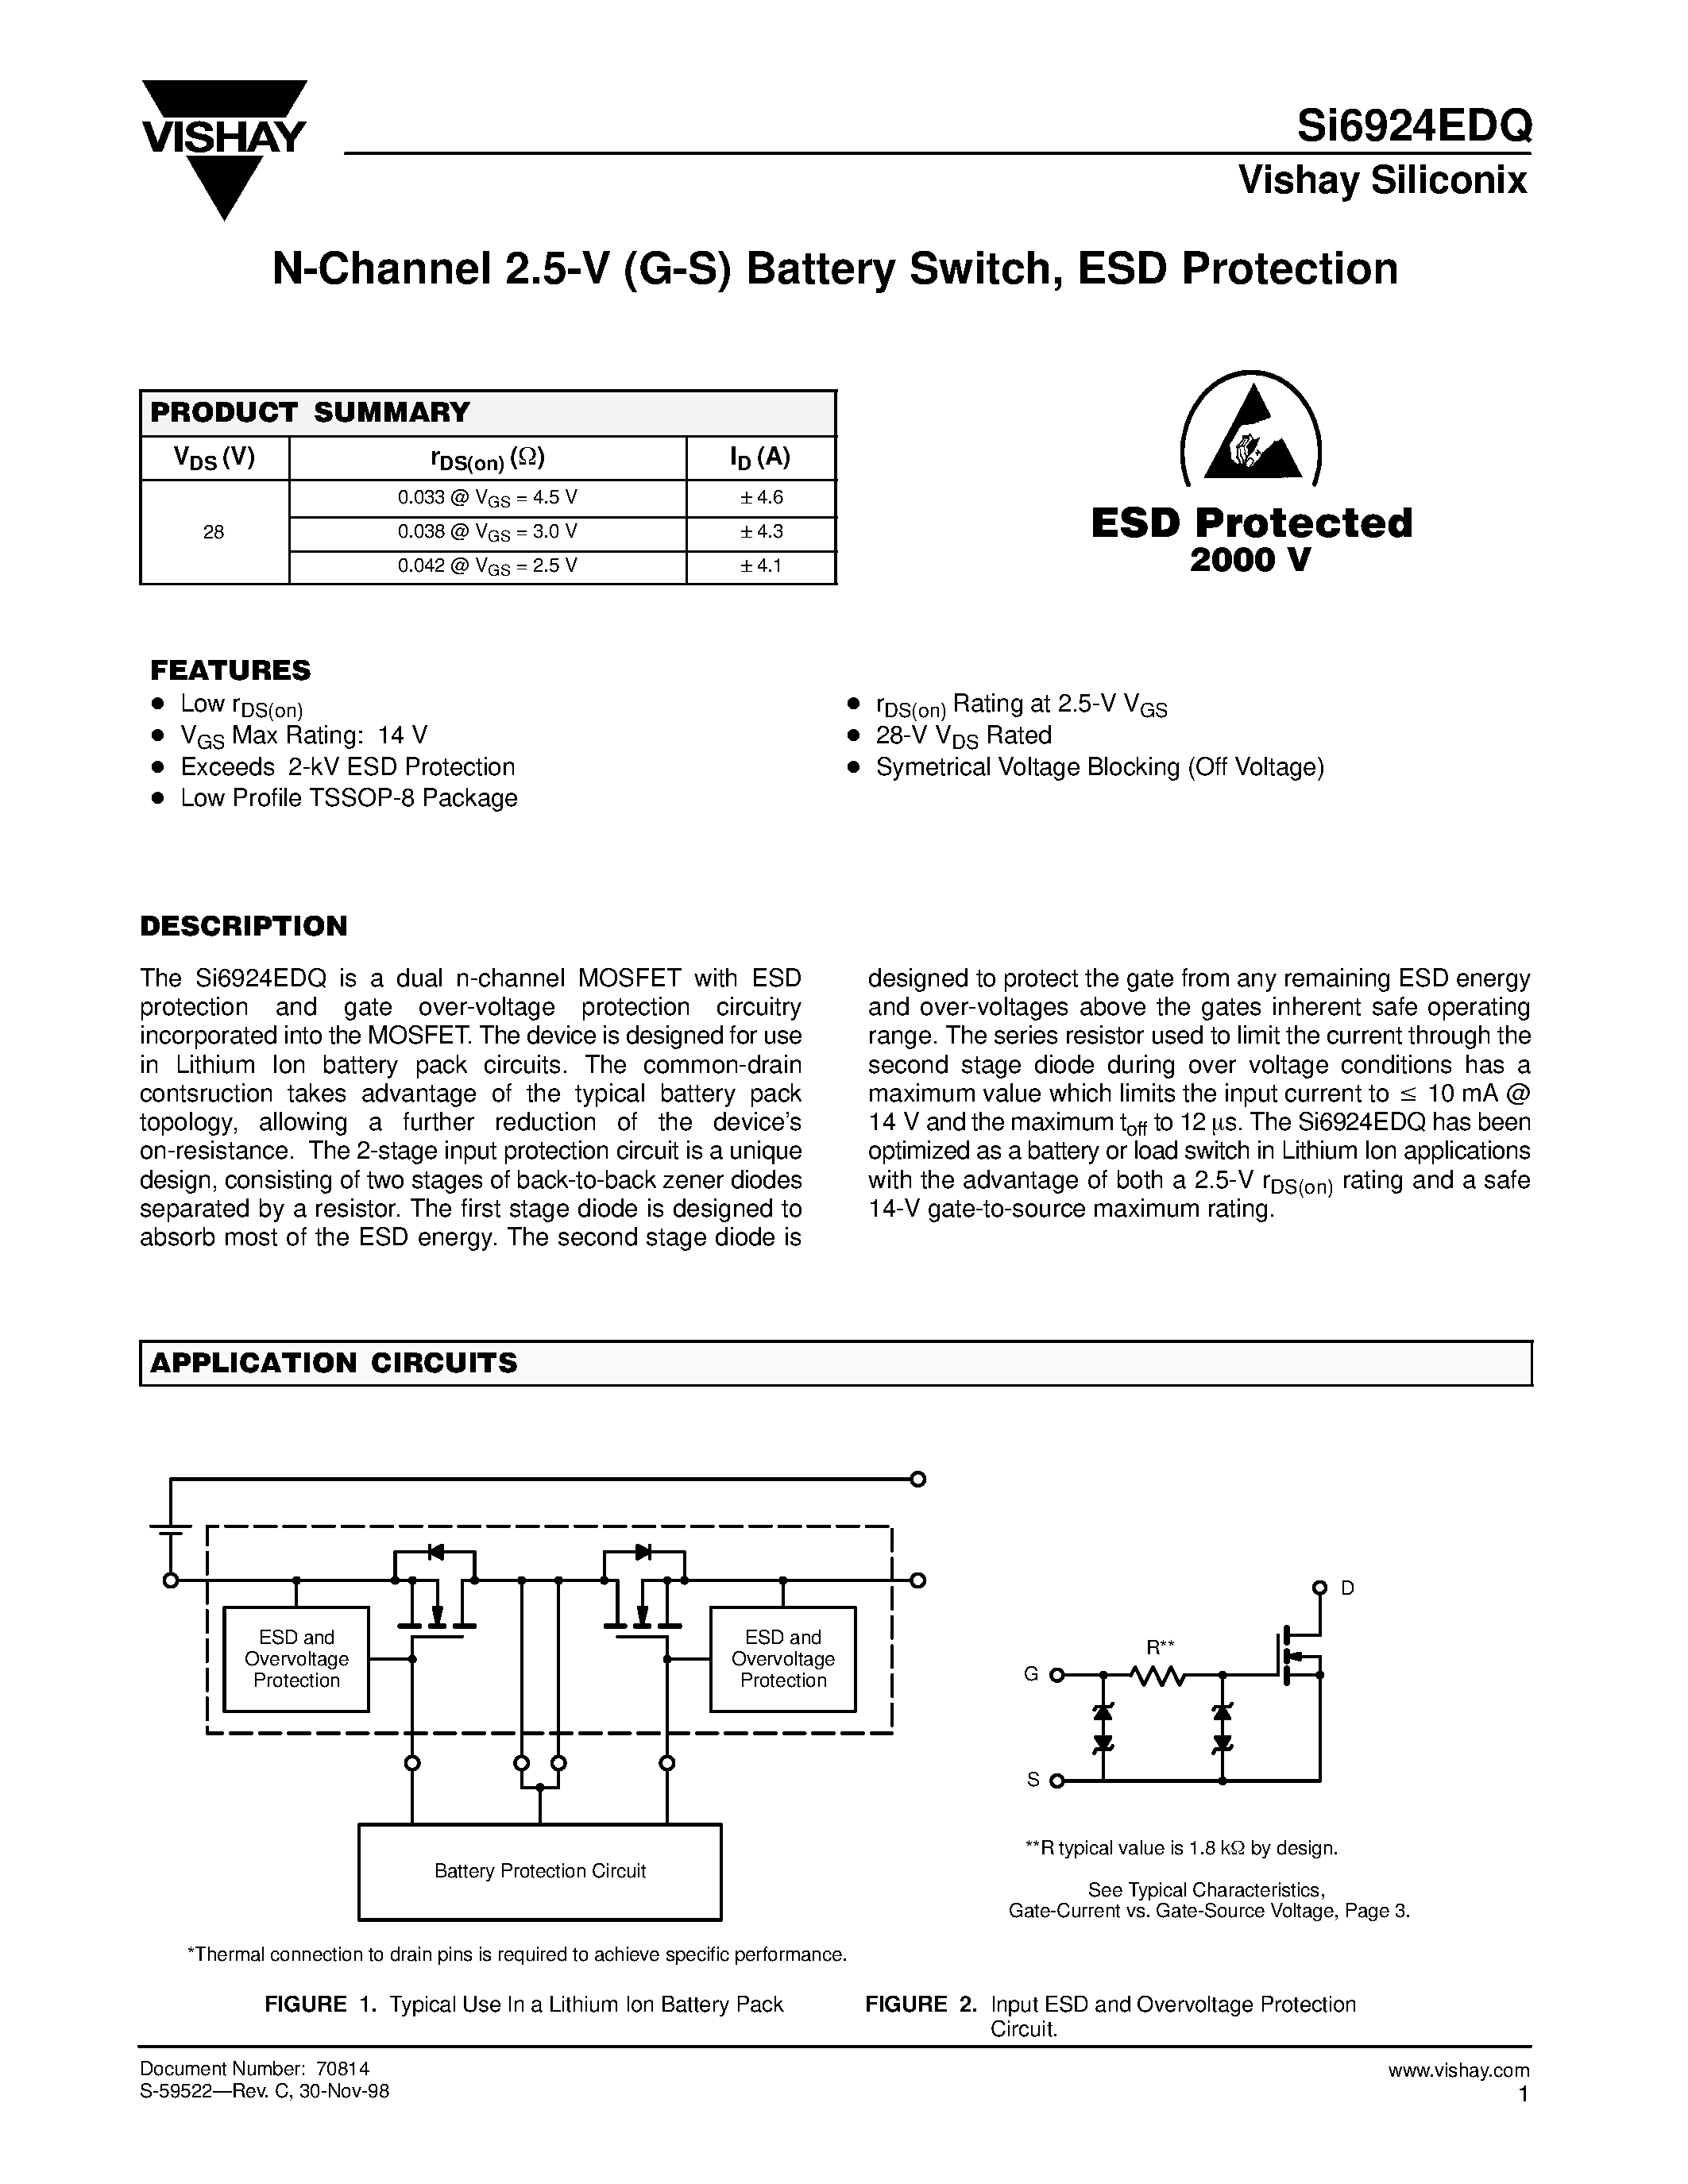 Datasheet SI6924EDQ - N-Channel 2.5-V (G-S) Battery Switch/ ESD Protection page 1